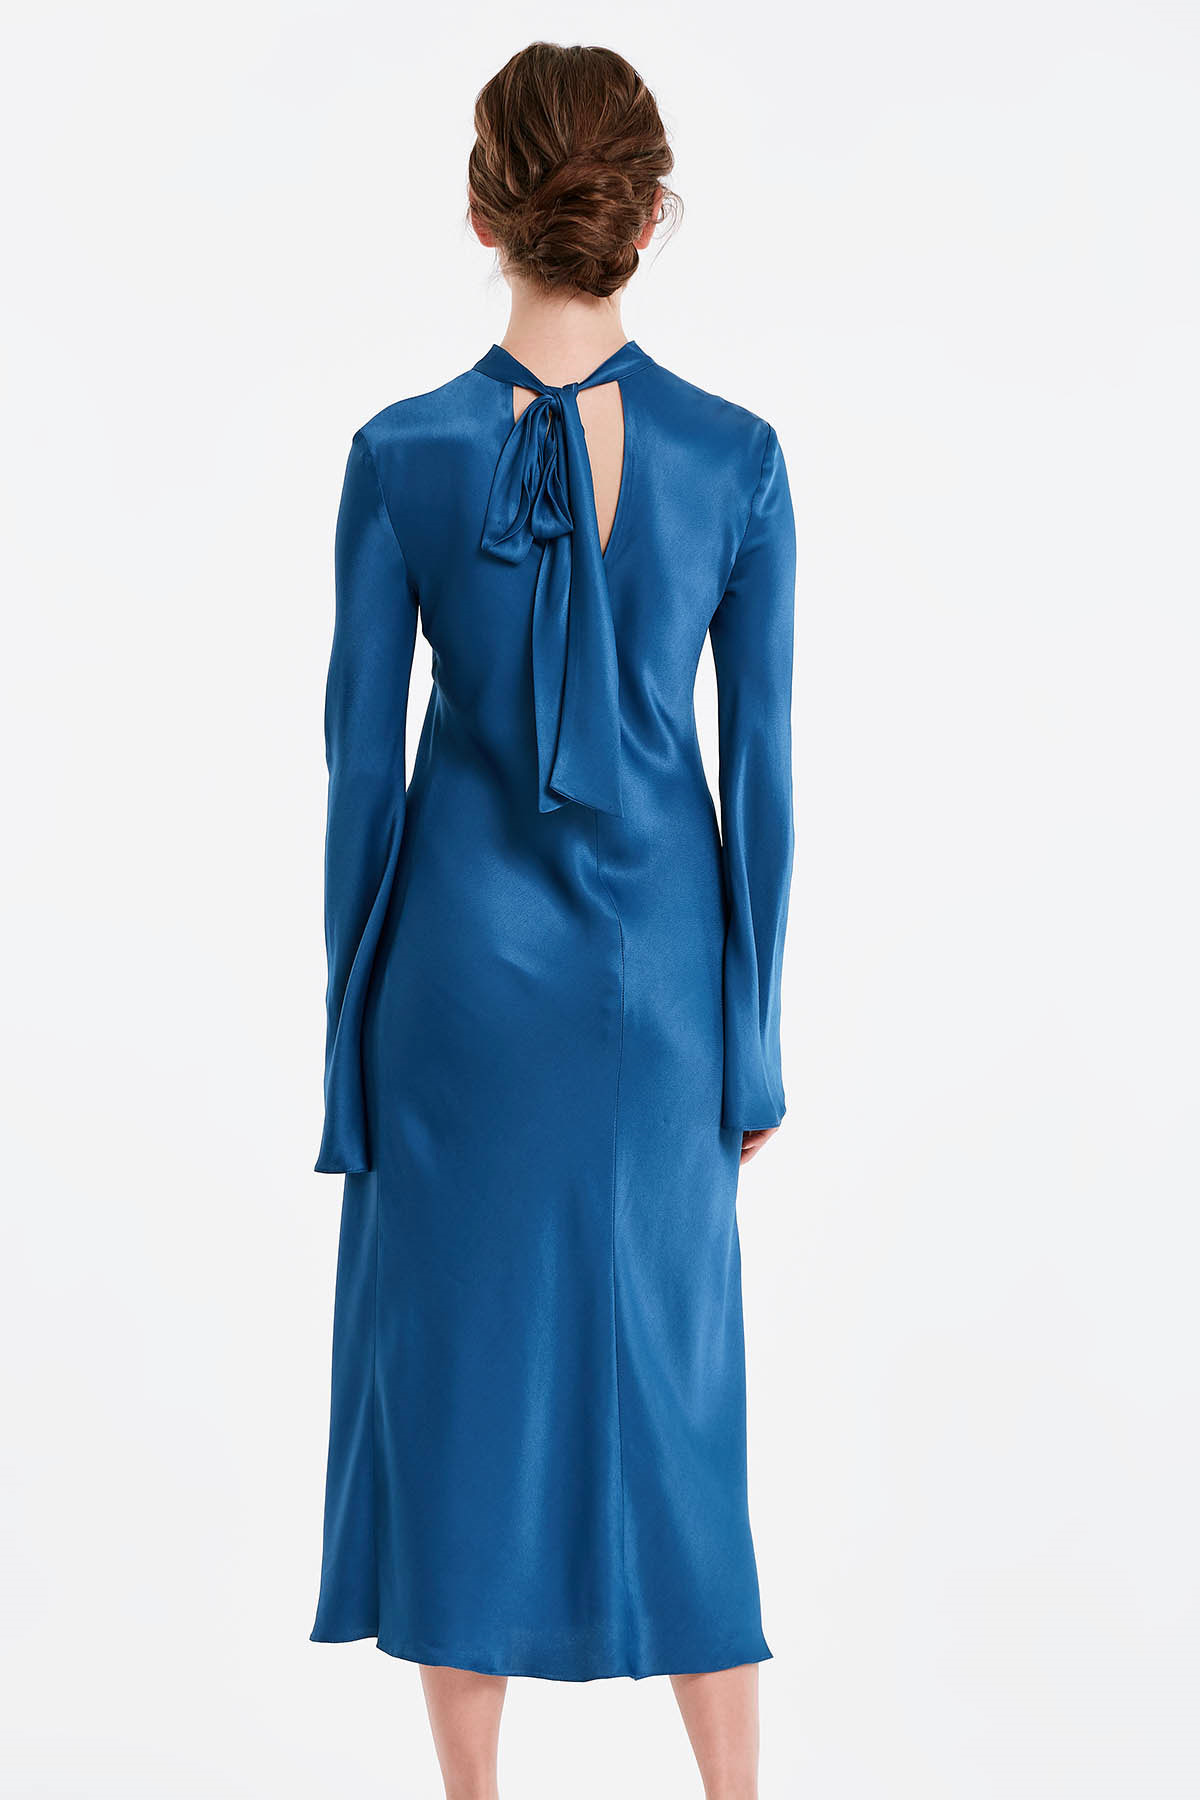 Blue dress with a bow at the back and flared sleeves, photo 3